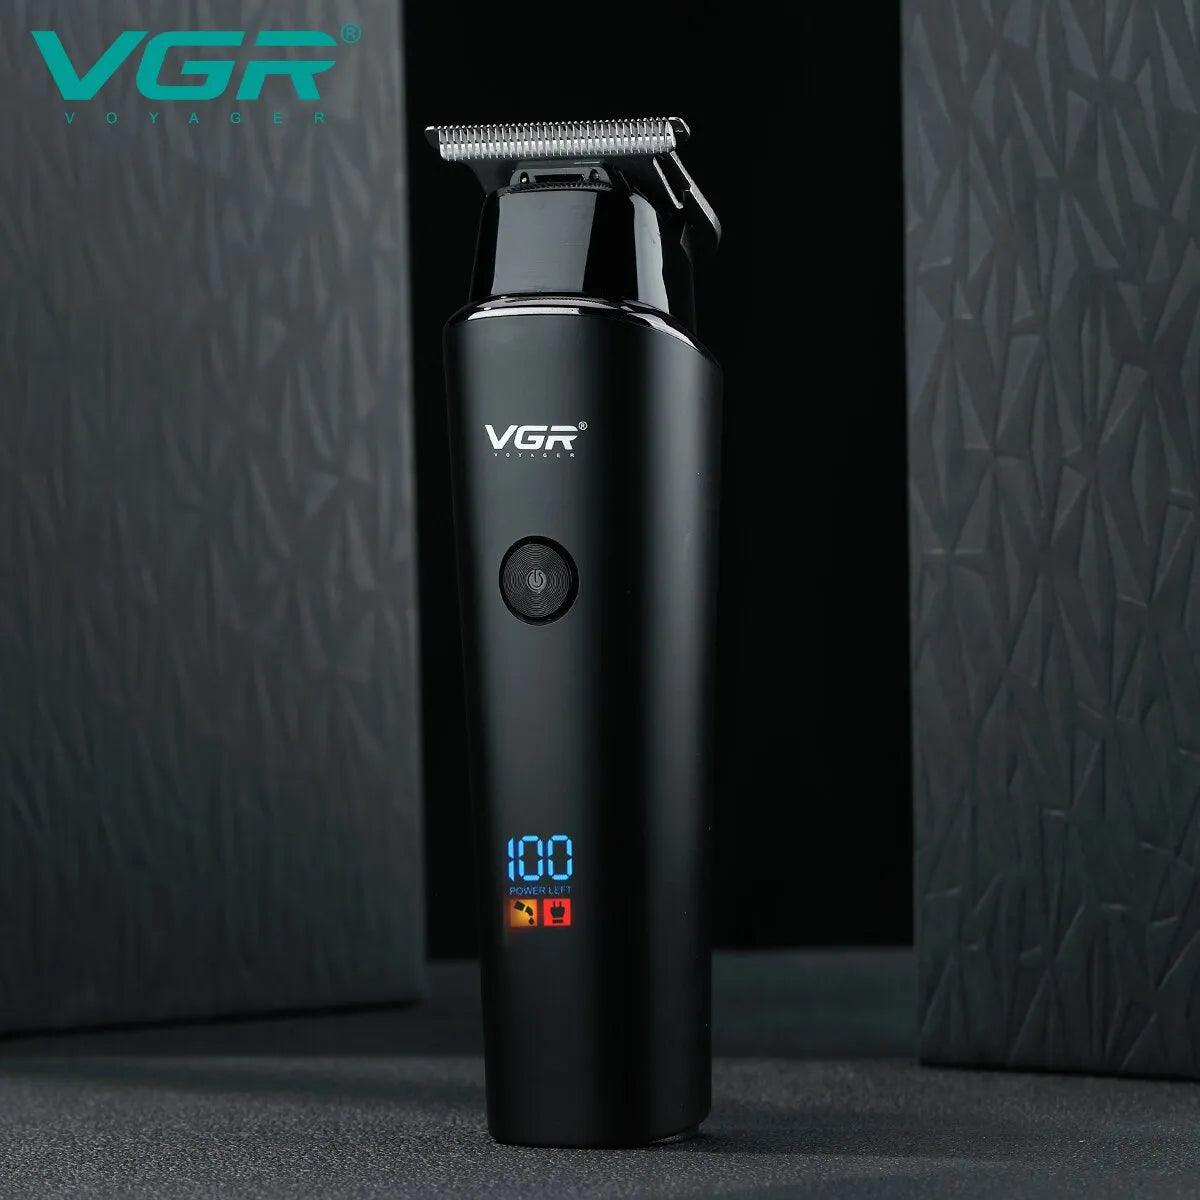 VGR Hair Trimmer Professional Electric Trimmers Cordless Hair Clipper Rechargeable LED Display V 937 - ADEEGA